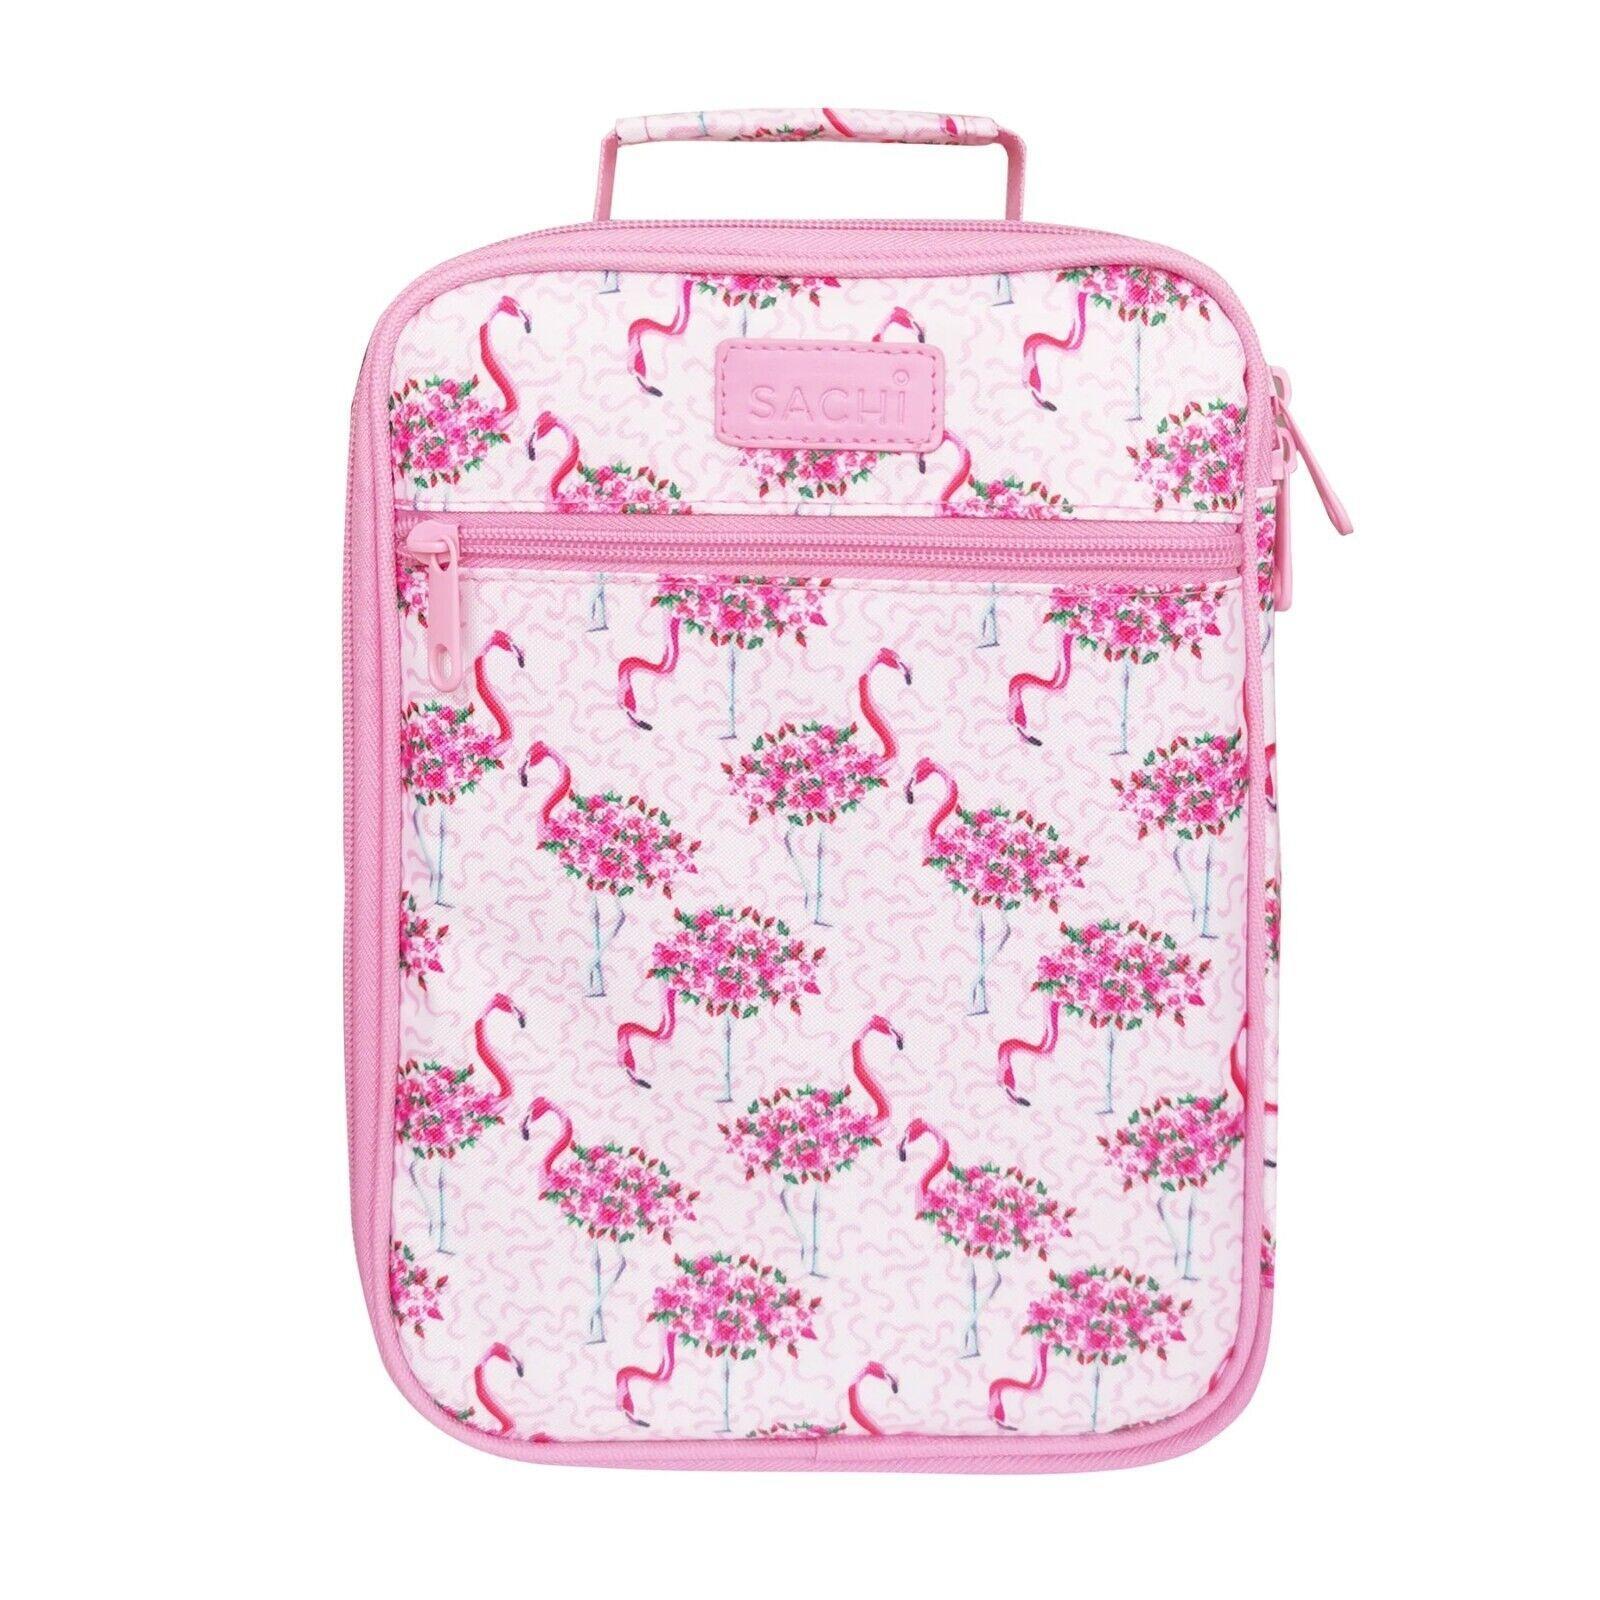 Sachi Insulated Lunch Tote Bag Thermal Cooler Carry School Flamingo